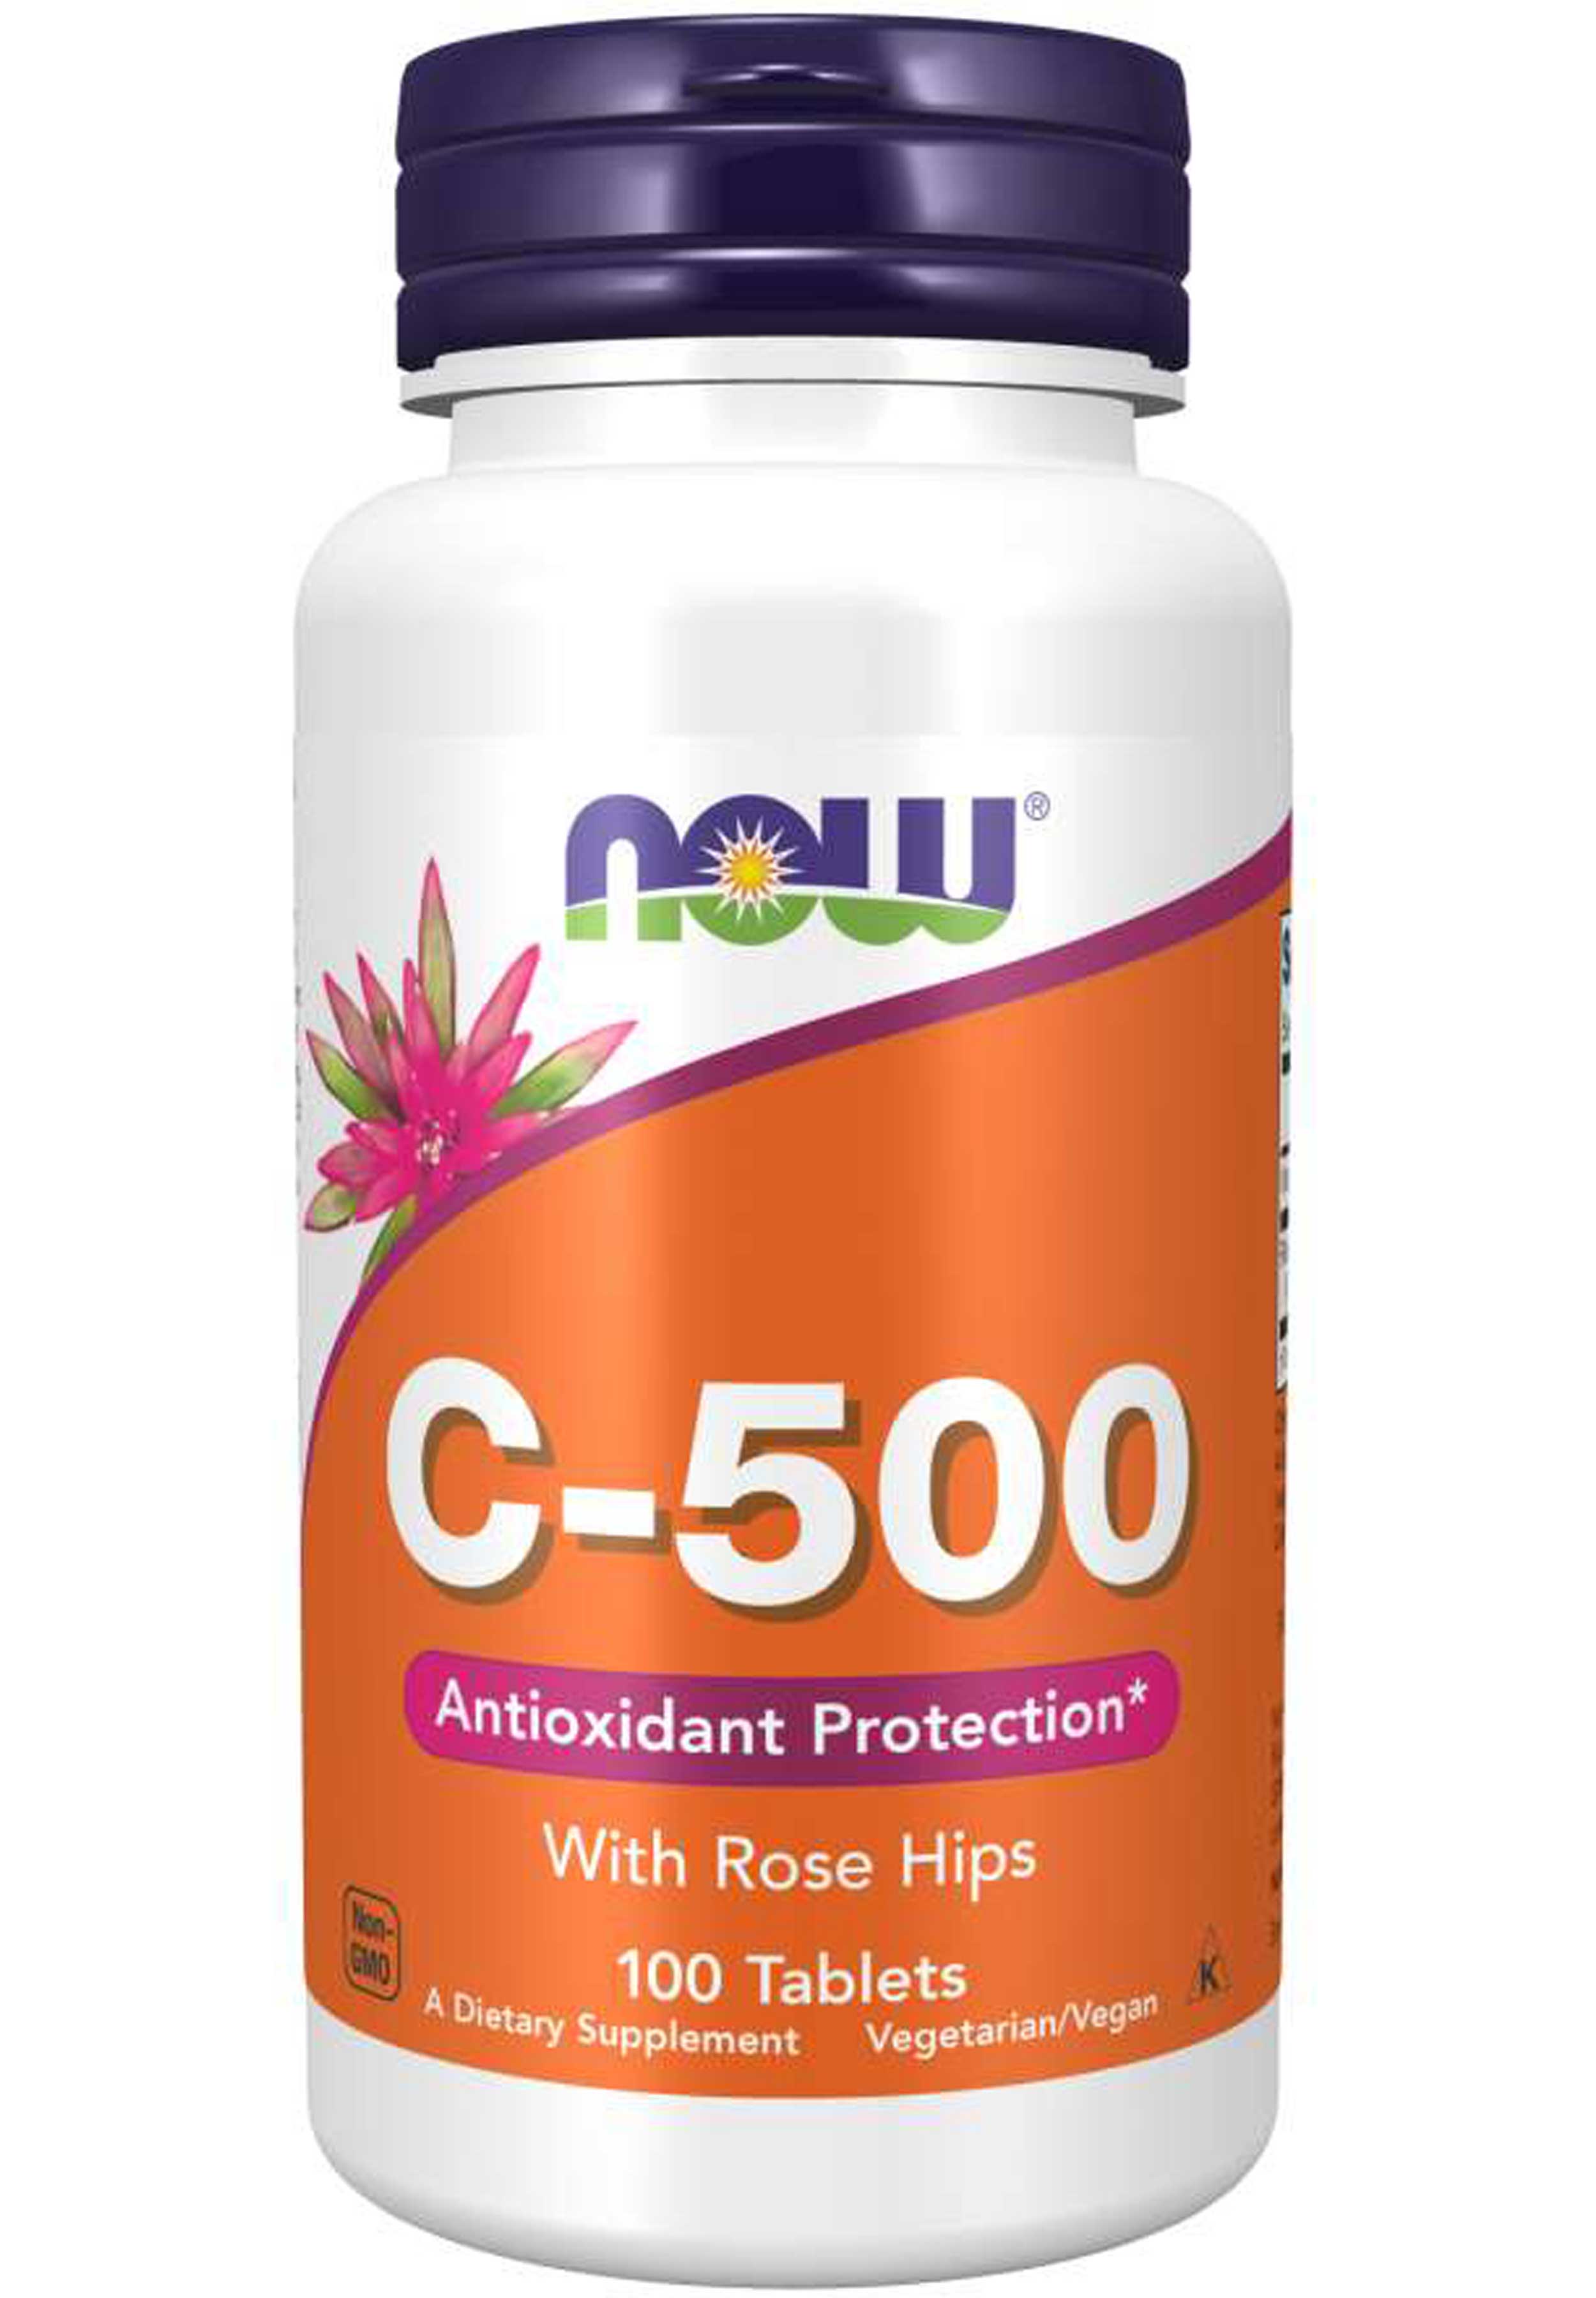 NOW C-500 with Rose Hips